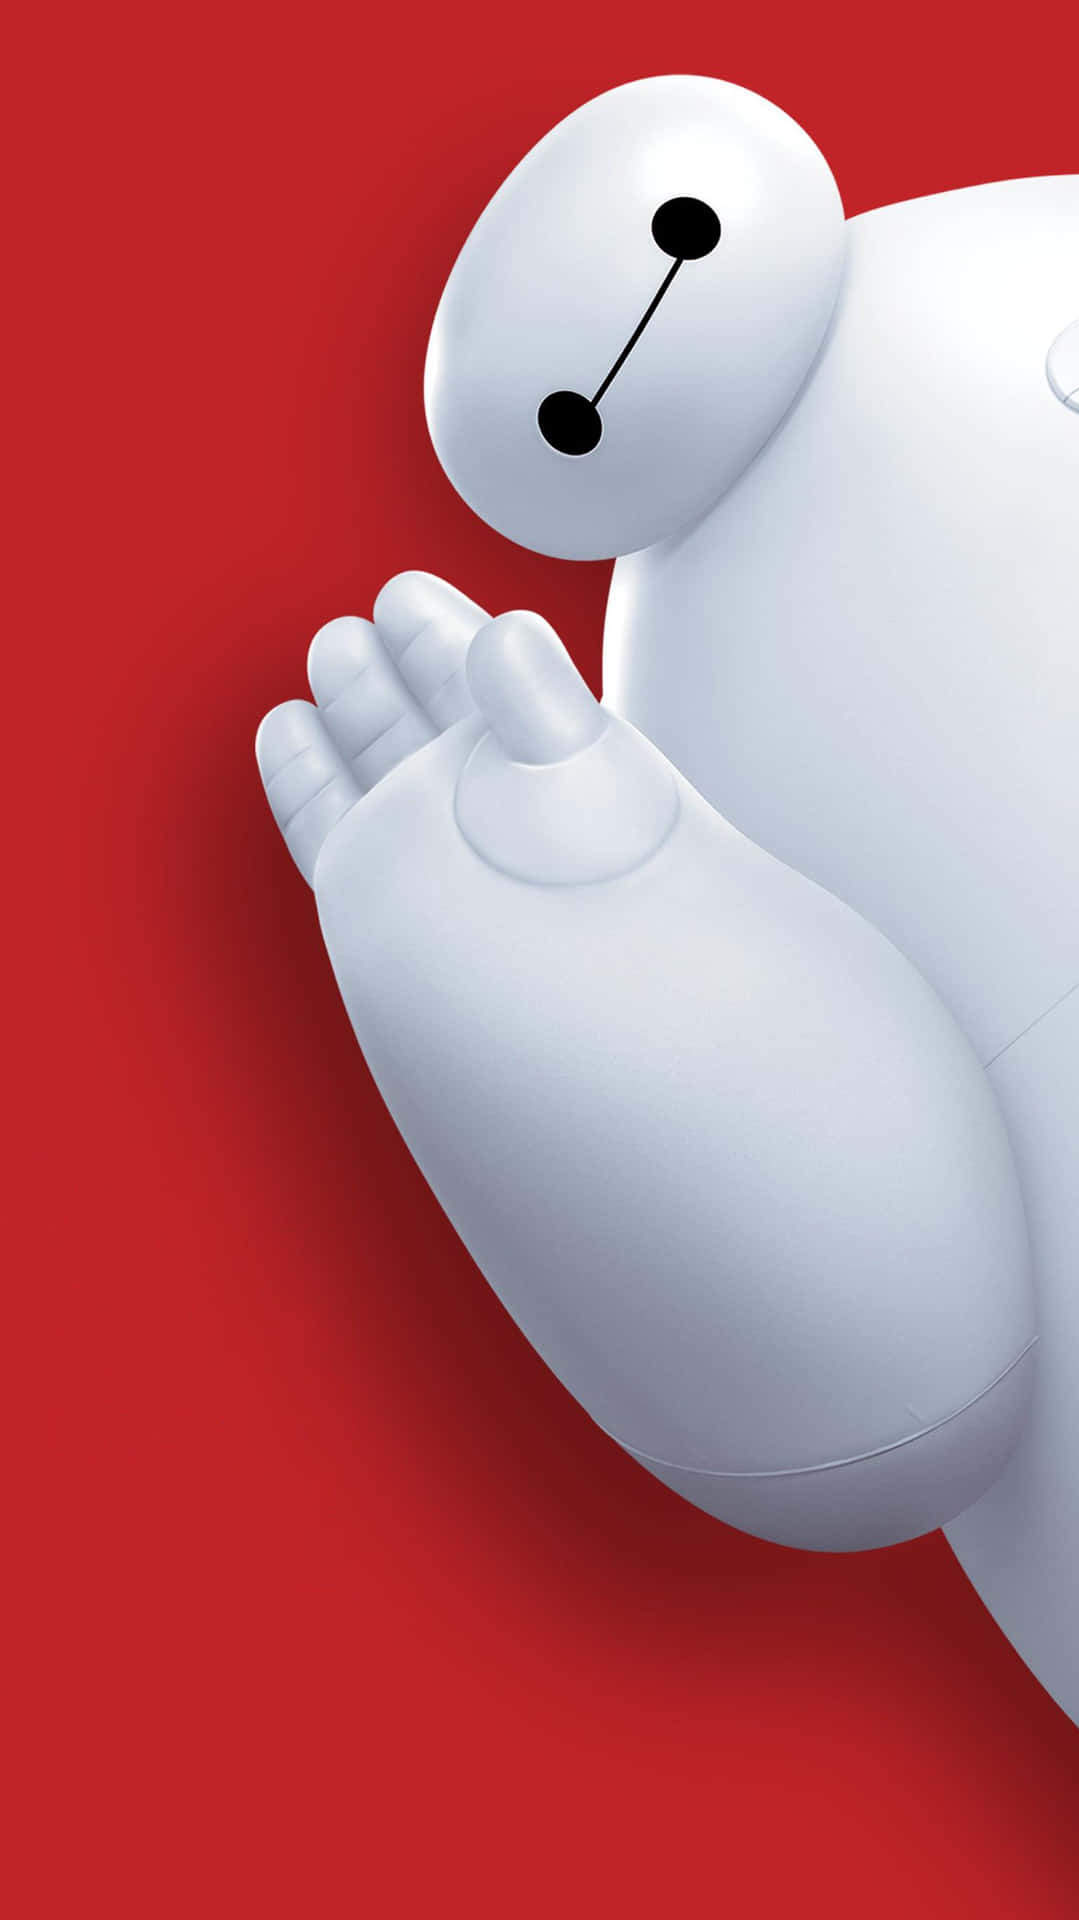 Large Baymax On The Phone Wallpaper